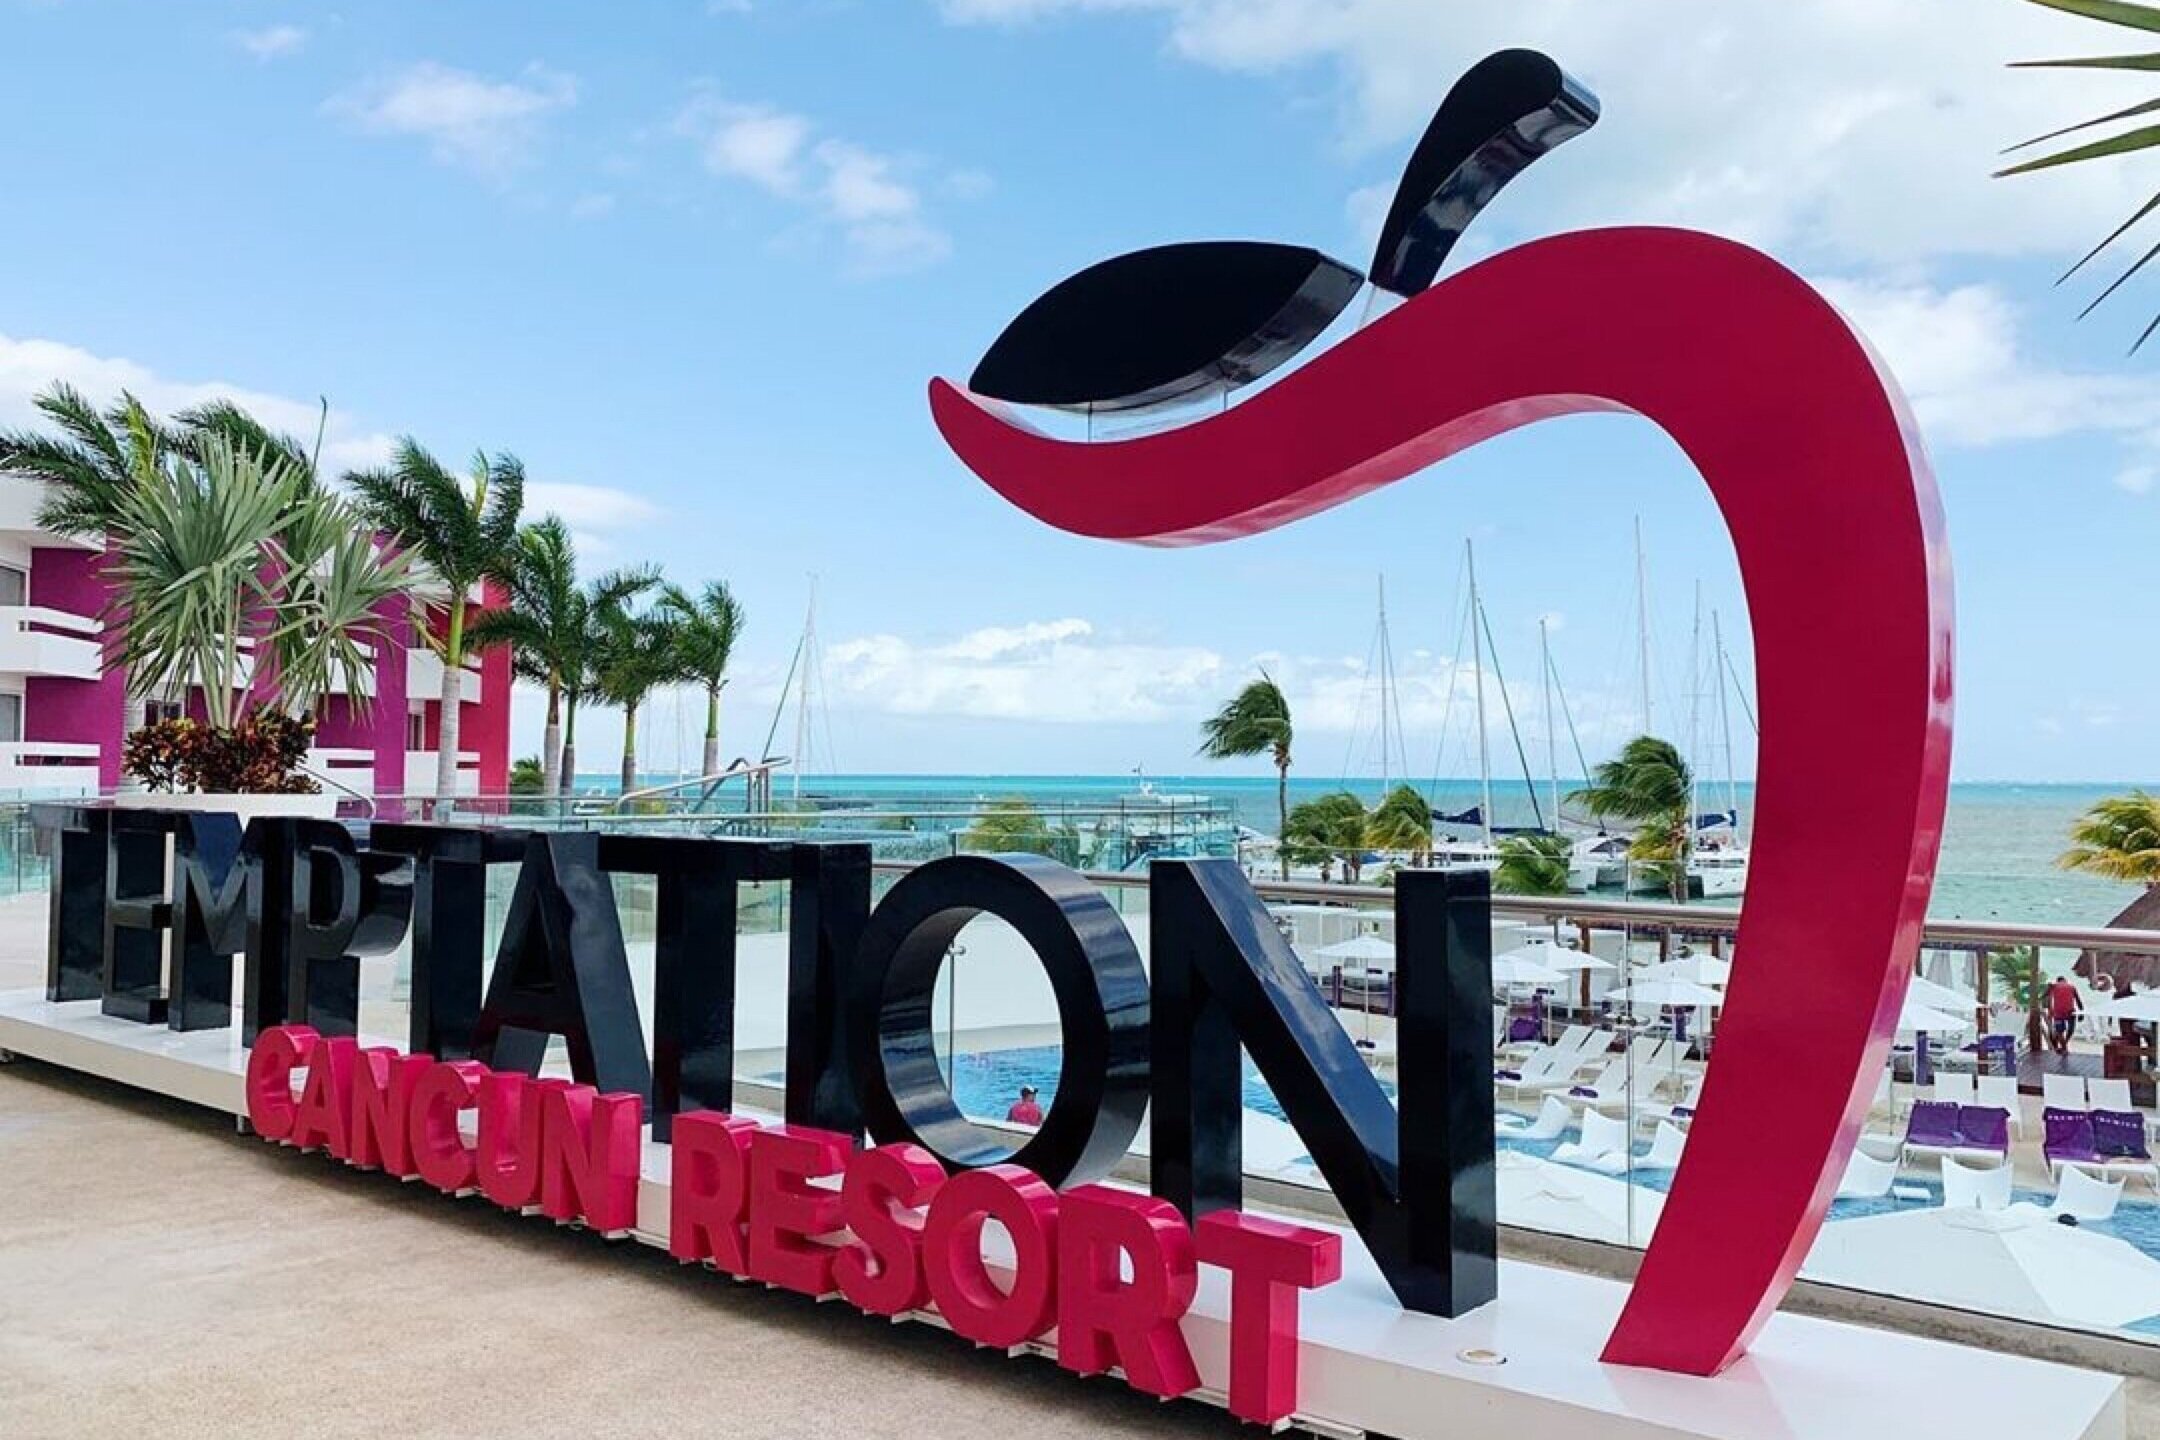 Temptation Cancun Resort Hotel Review — drillinjourneys picture